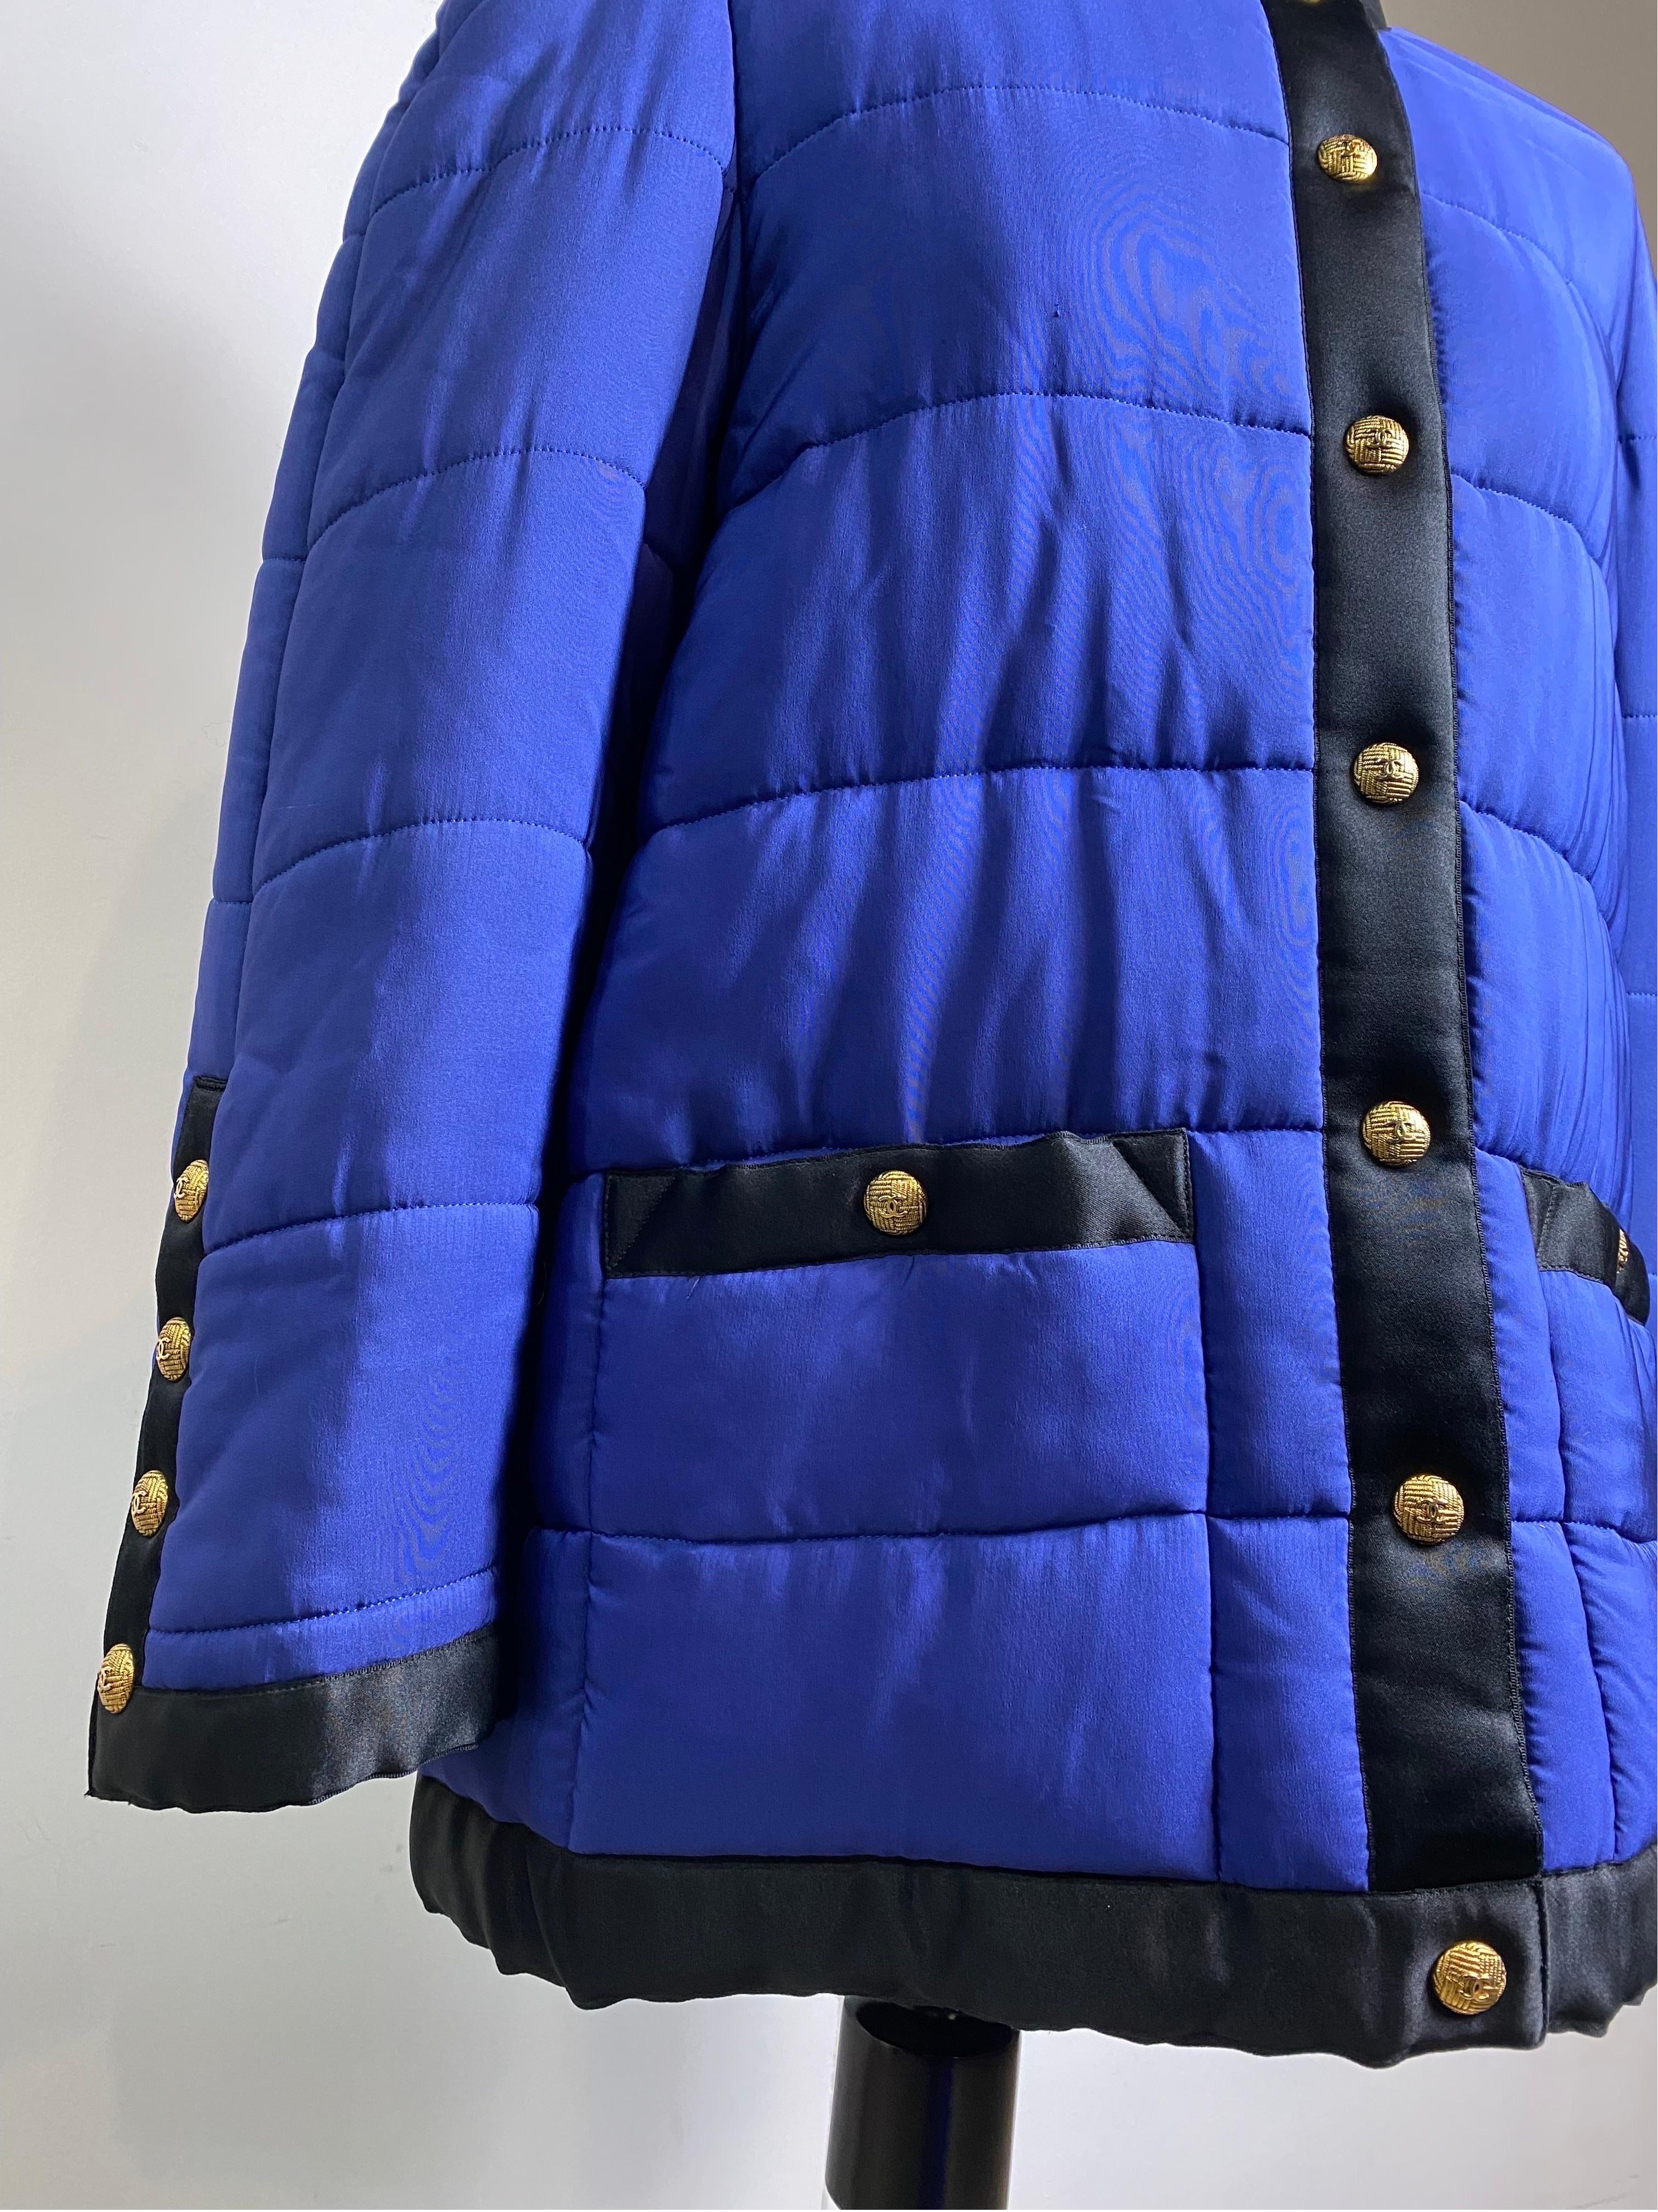 Chanel Boutique 1990/91 vintage quilted electric blue bomber jacket In Excellent Condition For Sale In Carnate, IT